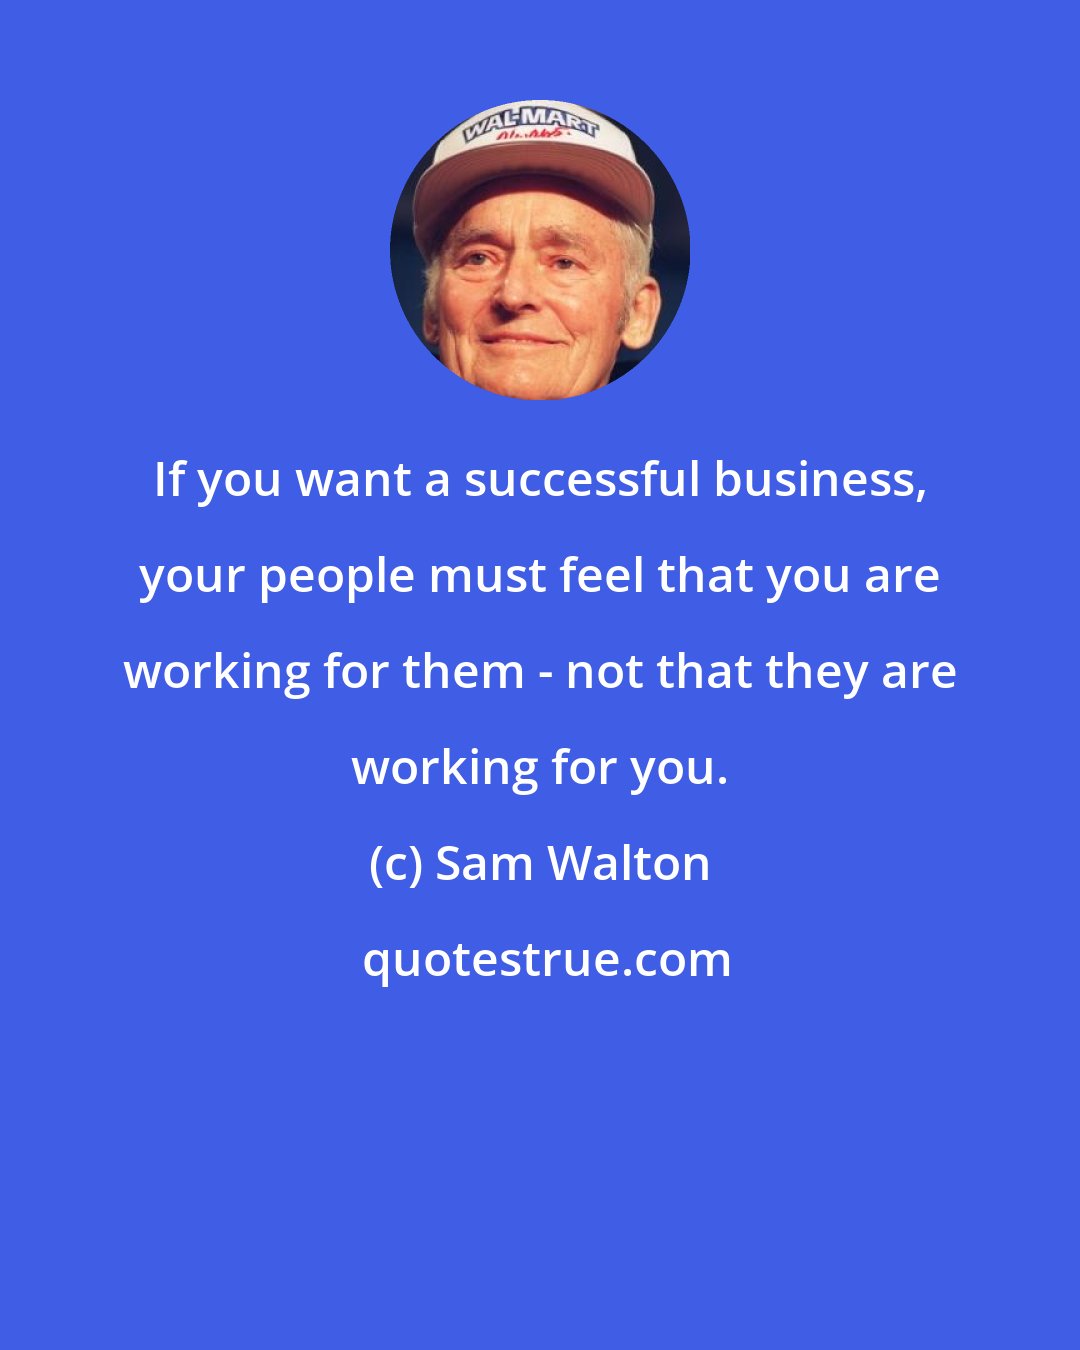 Sam Walton: If you want a successful business, your people must feel that you are working for them - not that they are working for you.